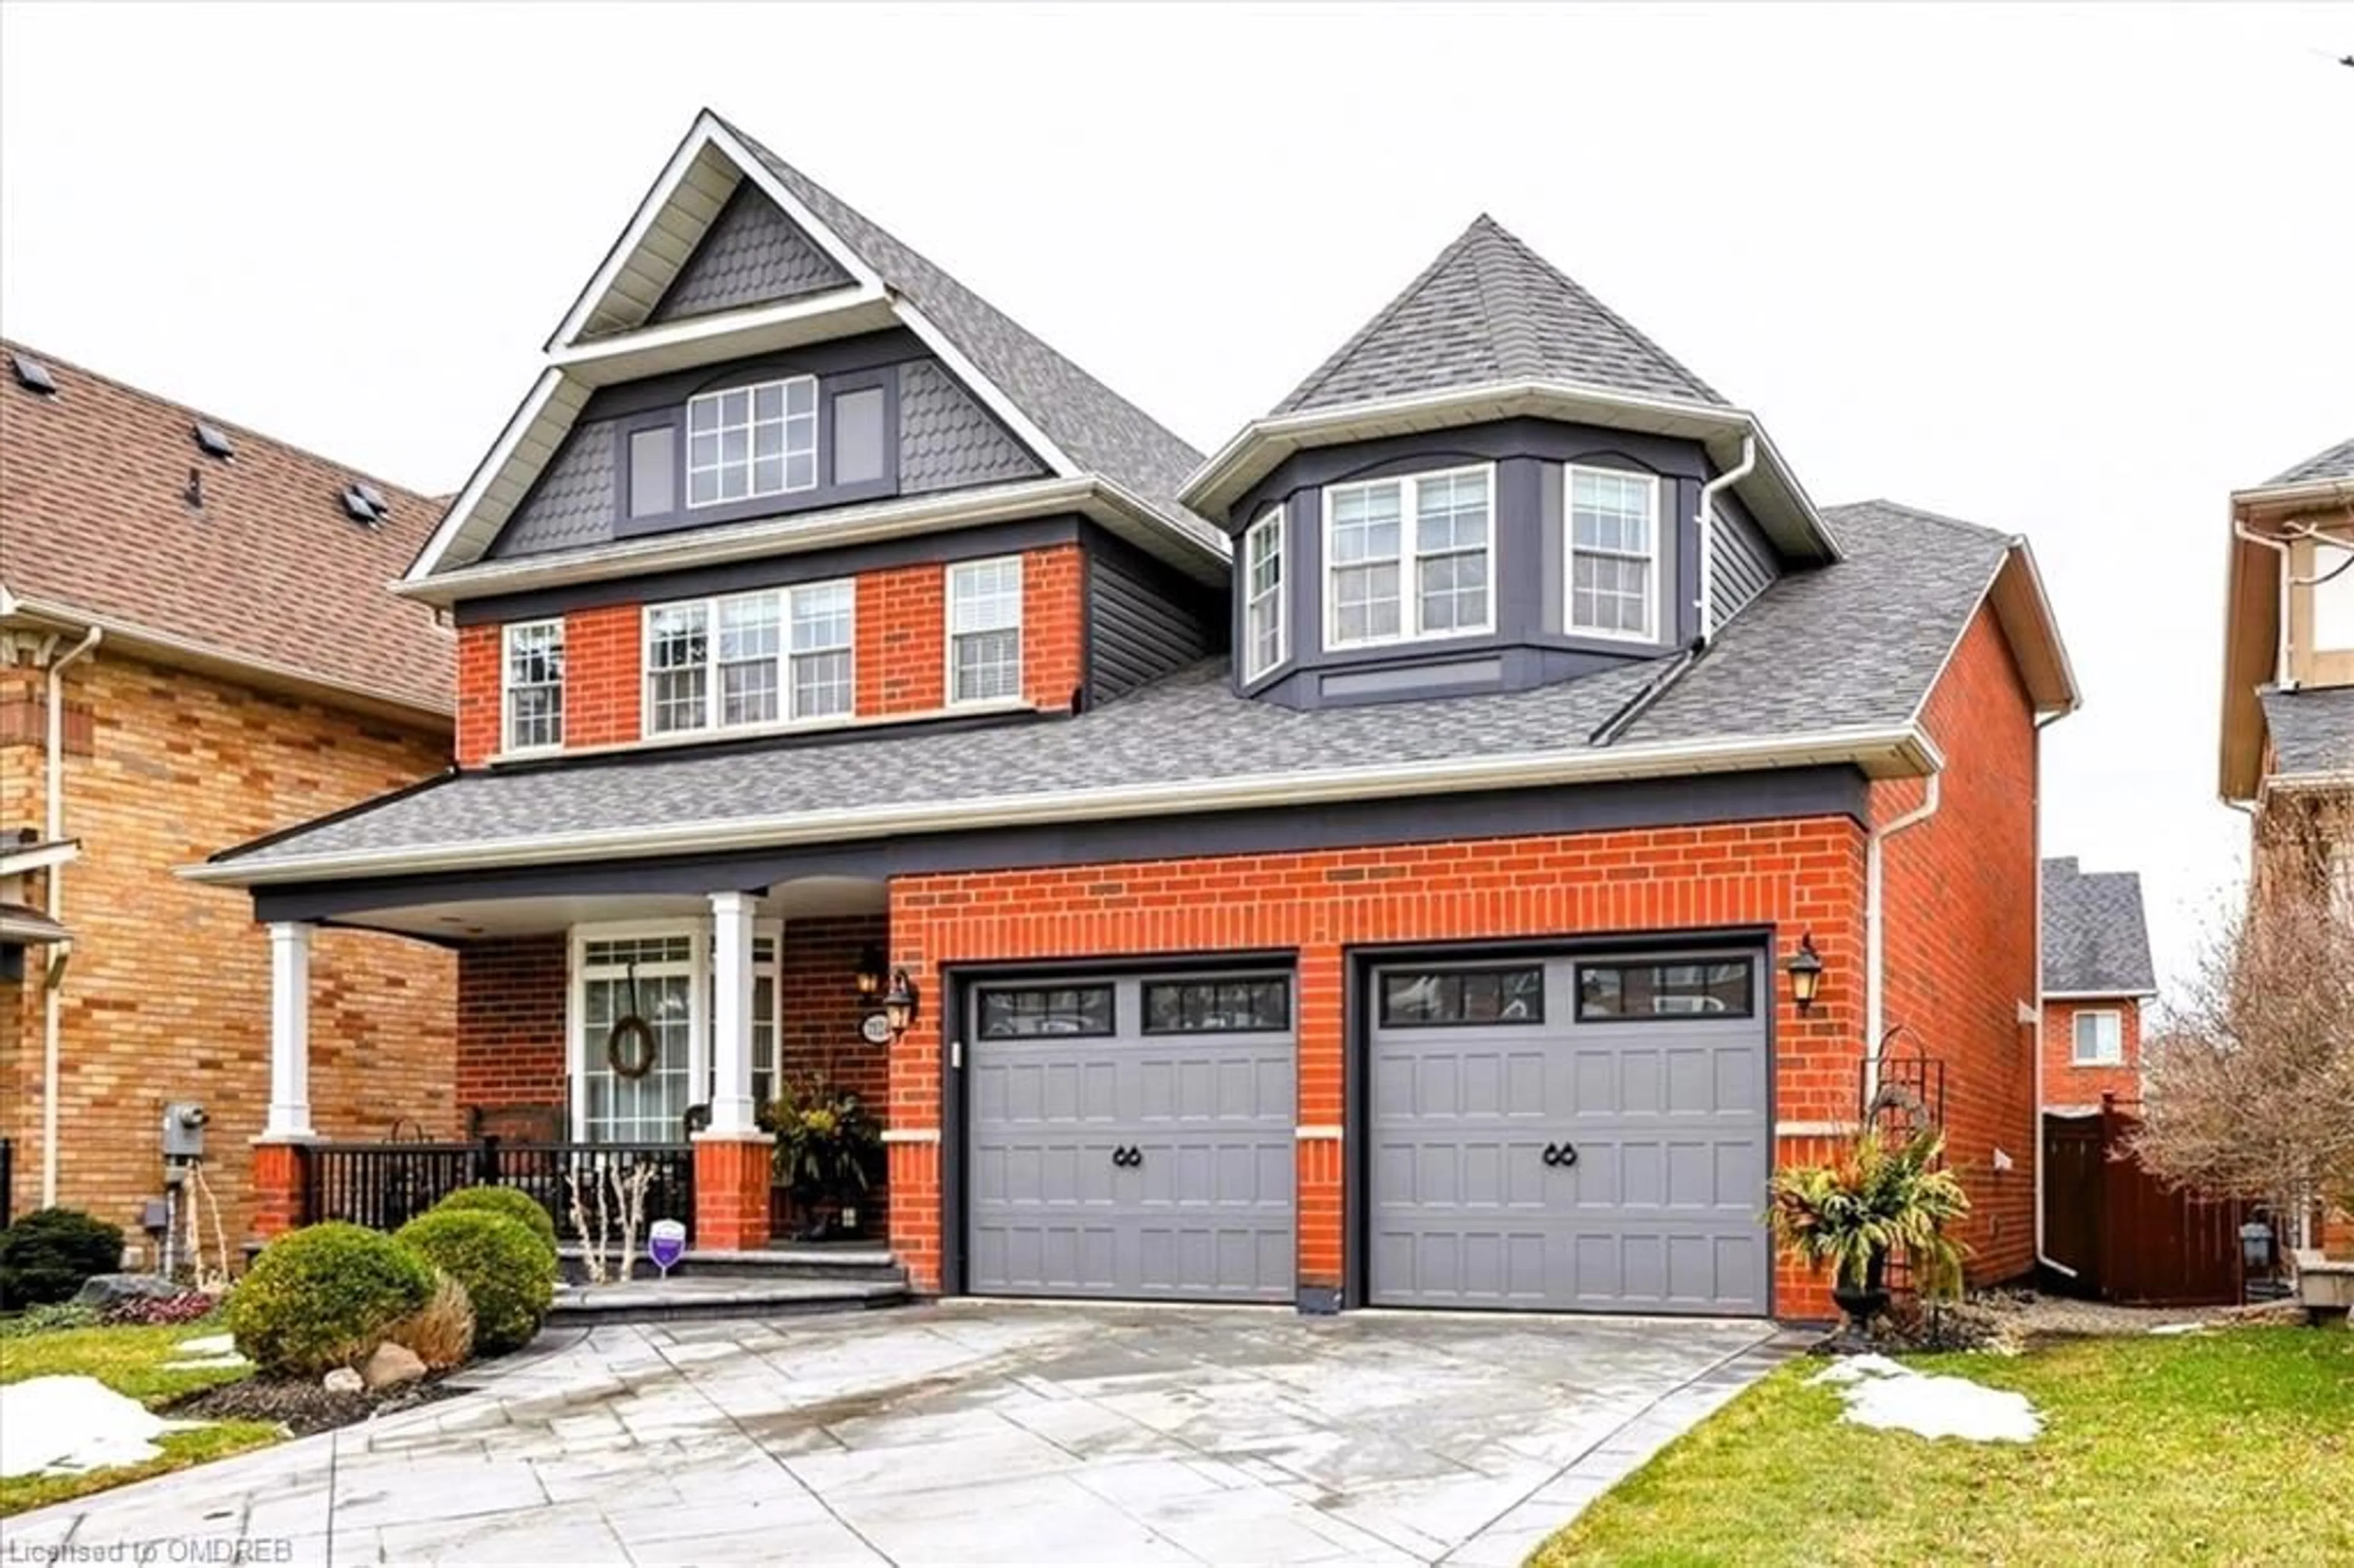 Home with brick exterior material for 7124 Baskerville Run, Mississauga Ontario L5W 1W3